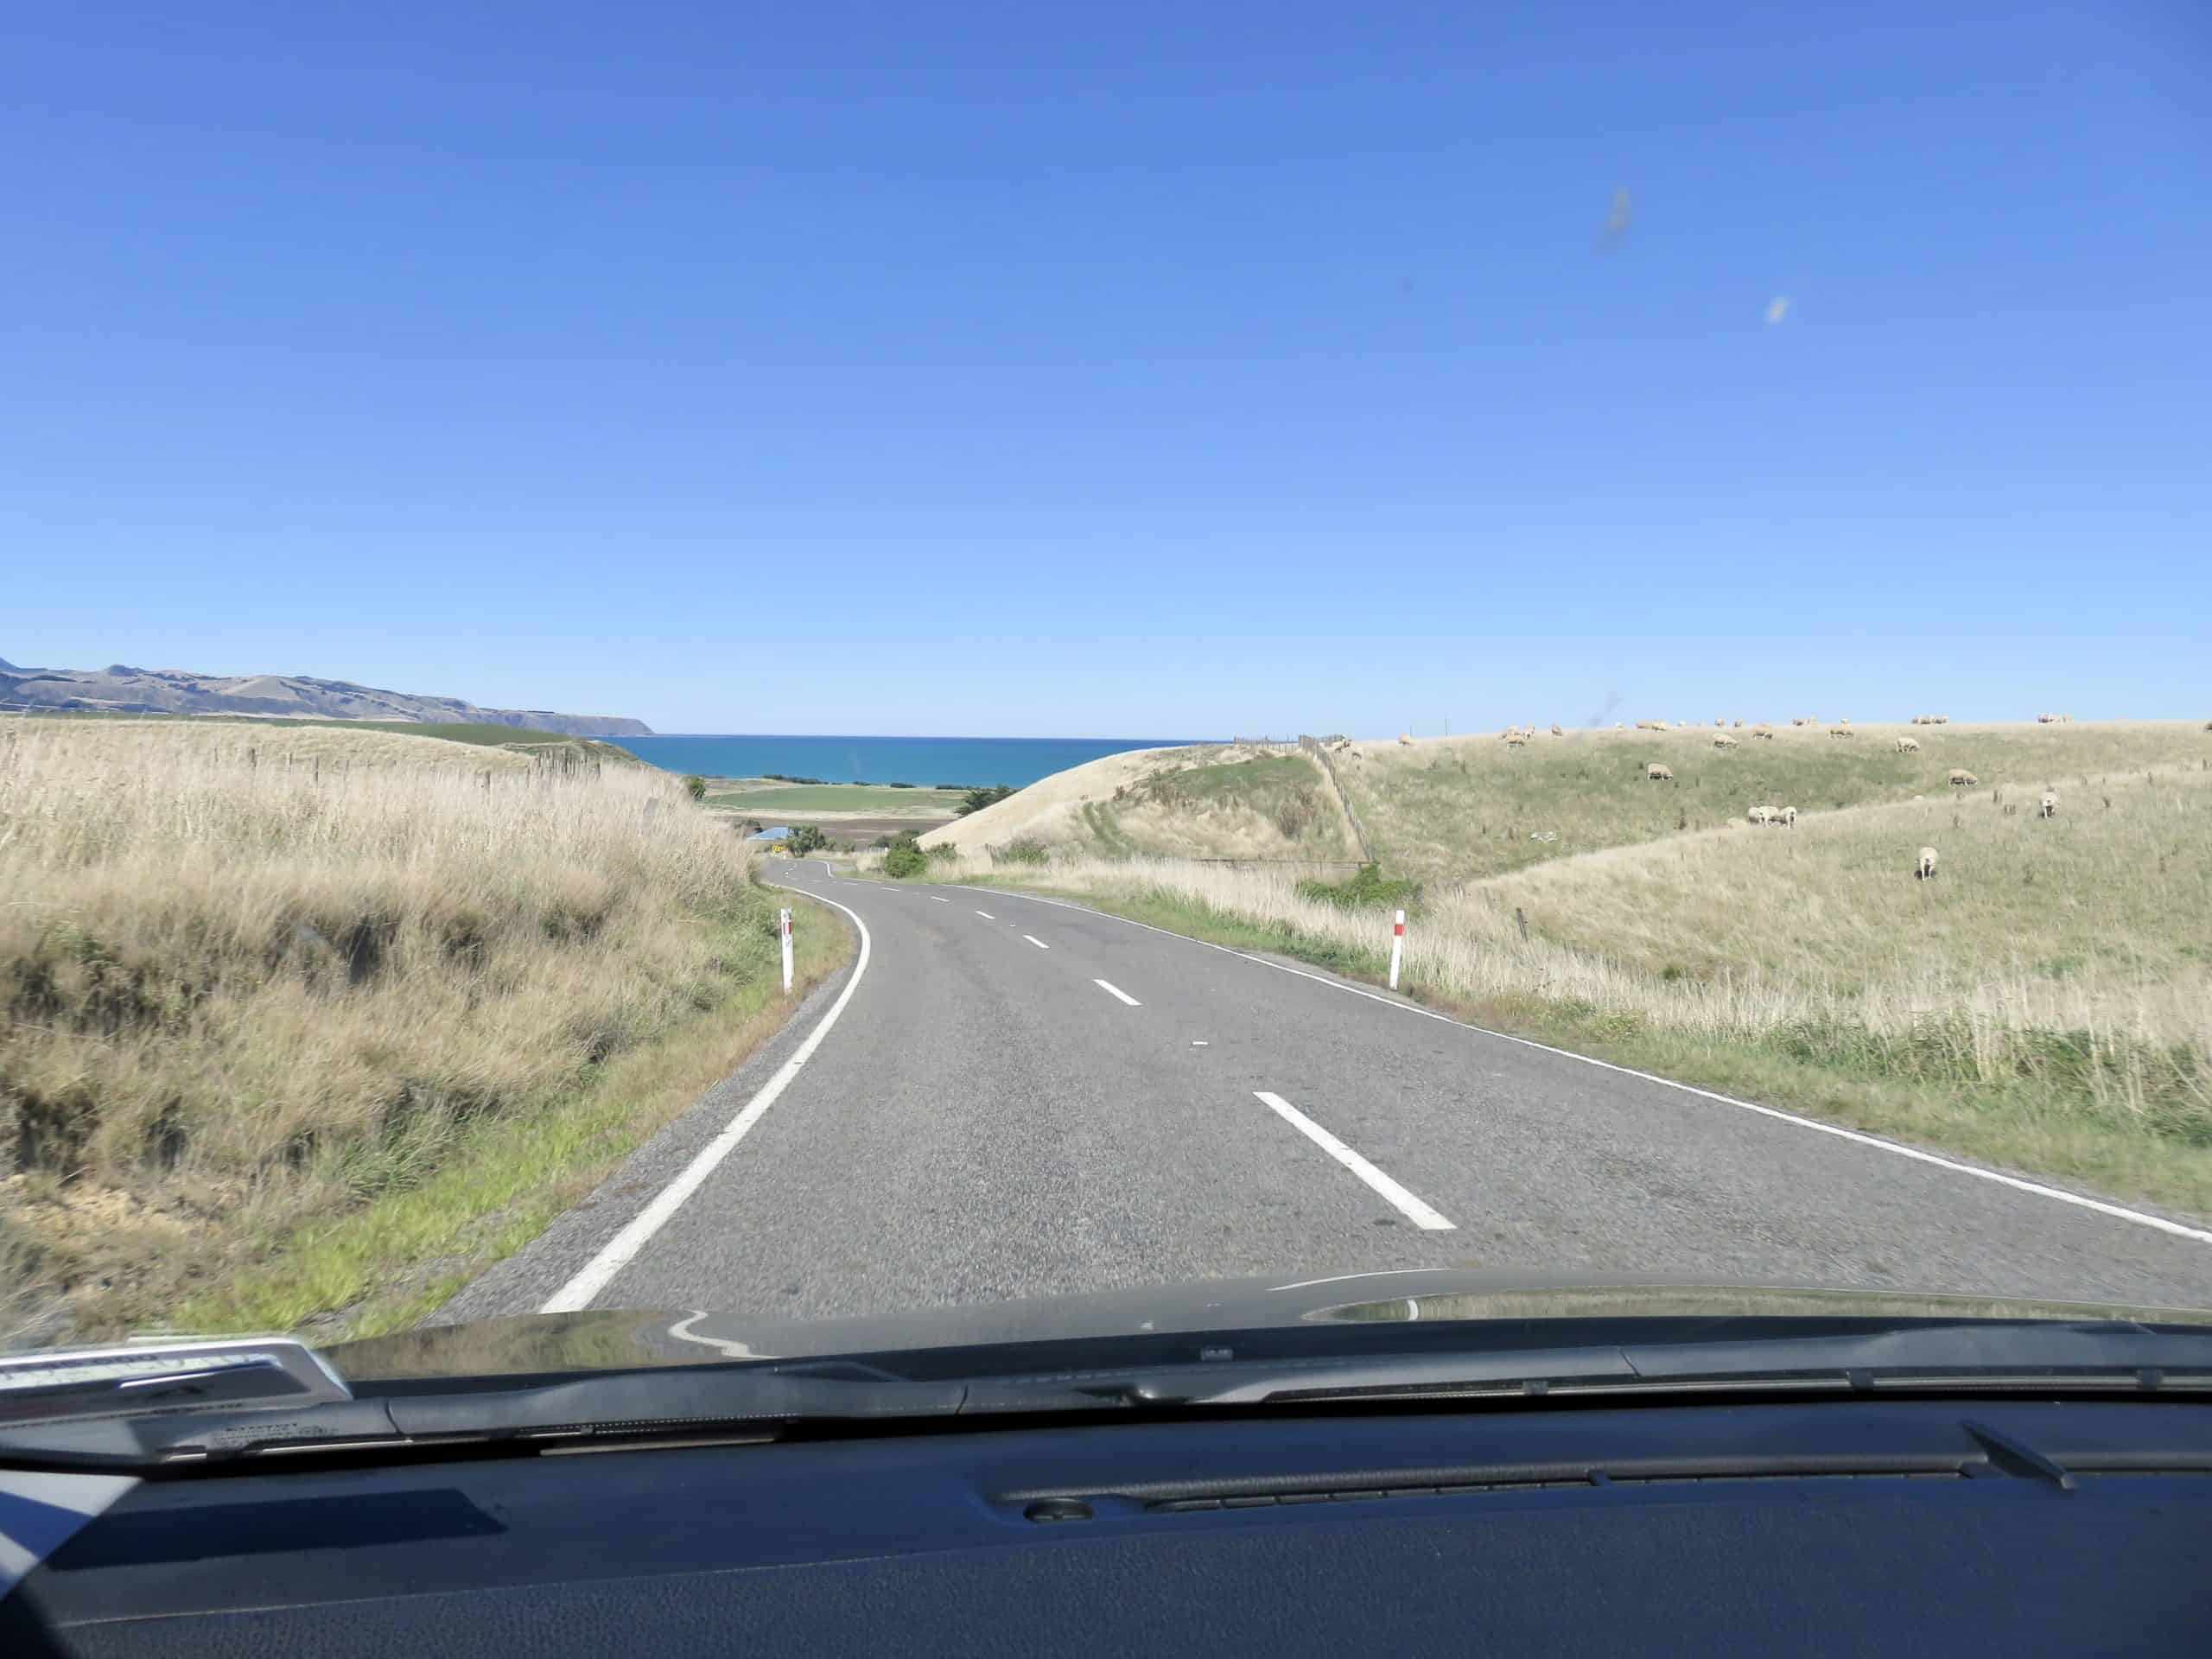 The roads in New Zealand are generally in great condition